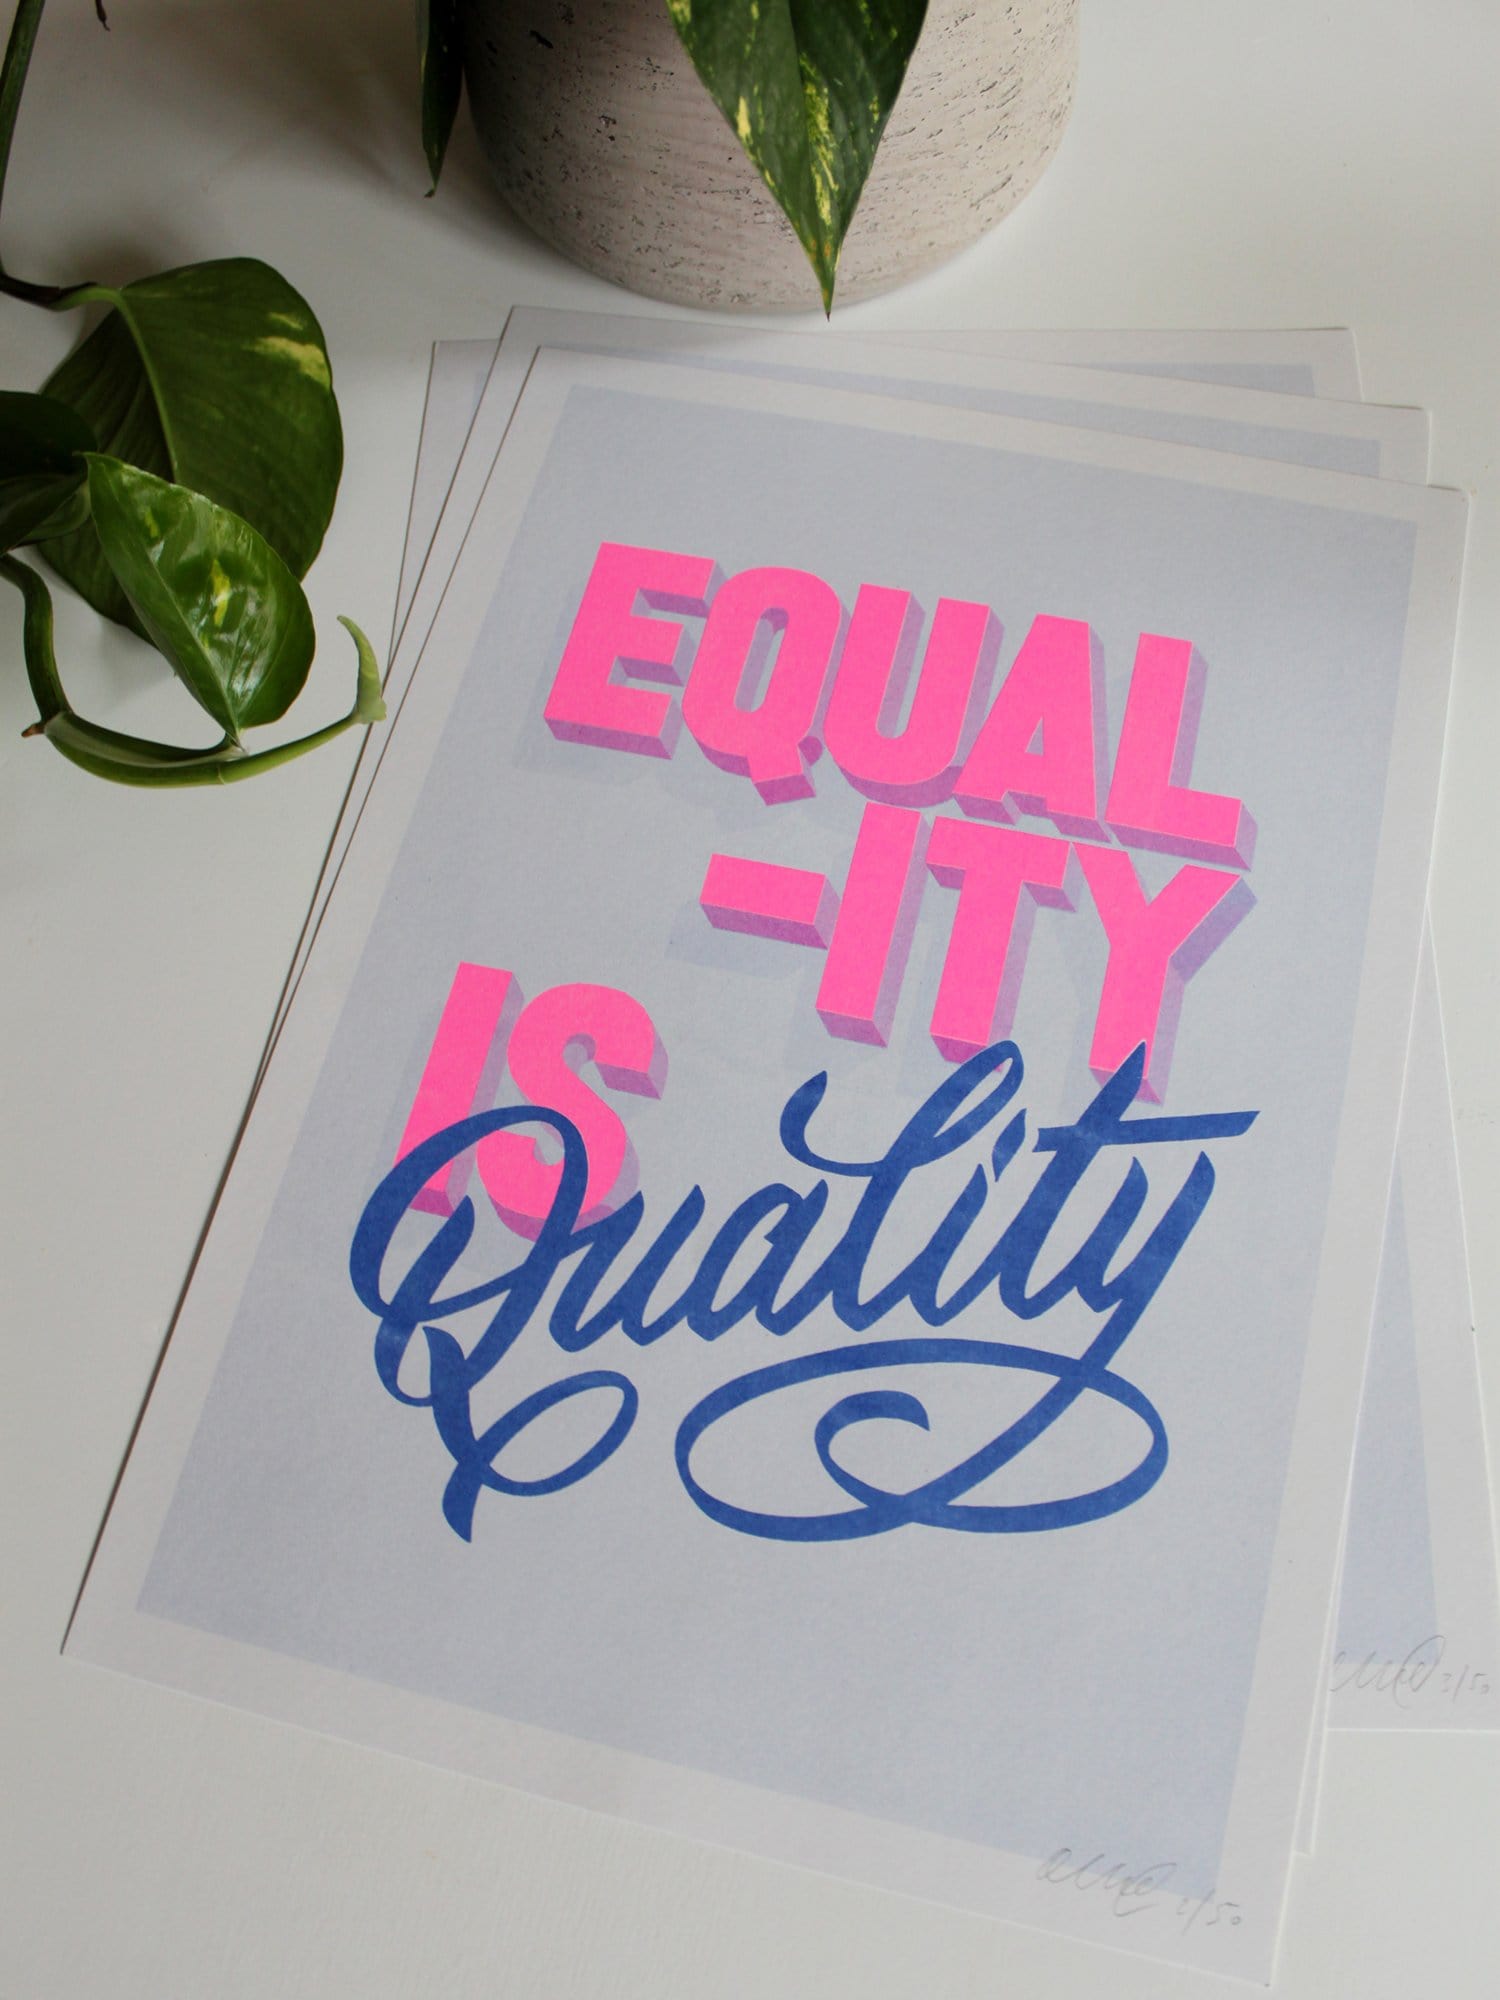 Equality is Quality, 2020 Enlarged